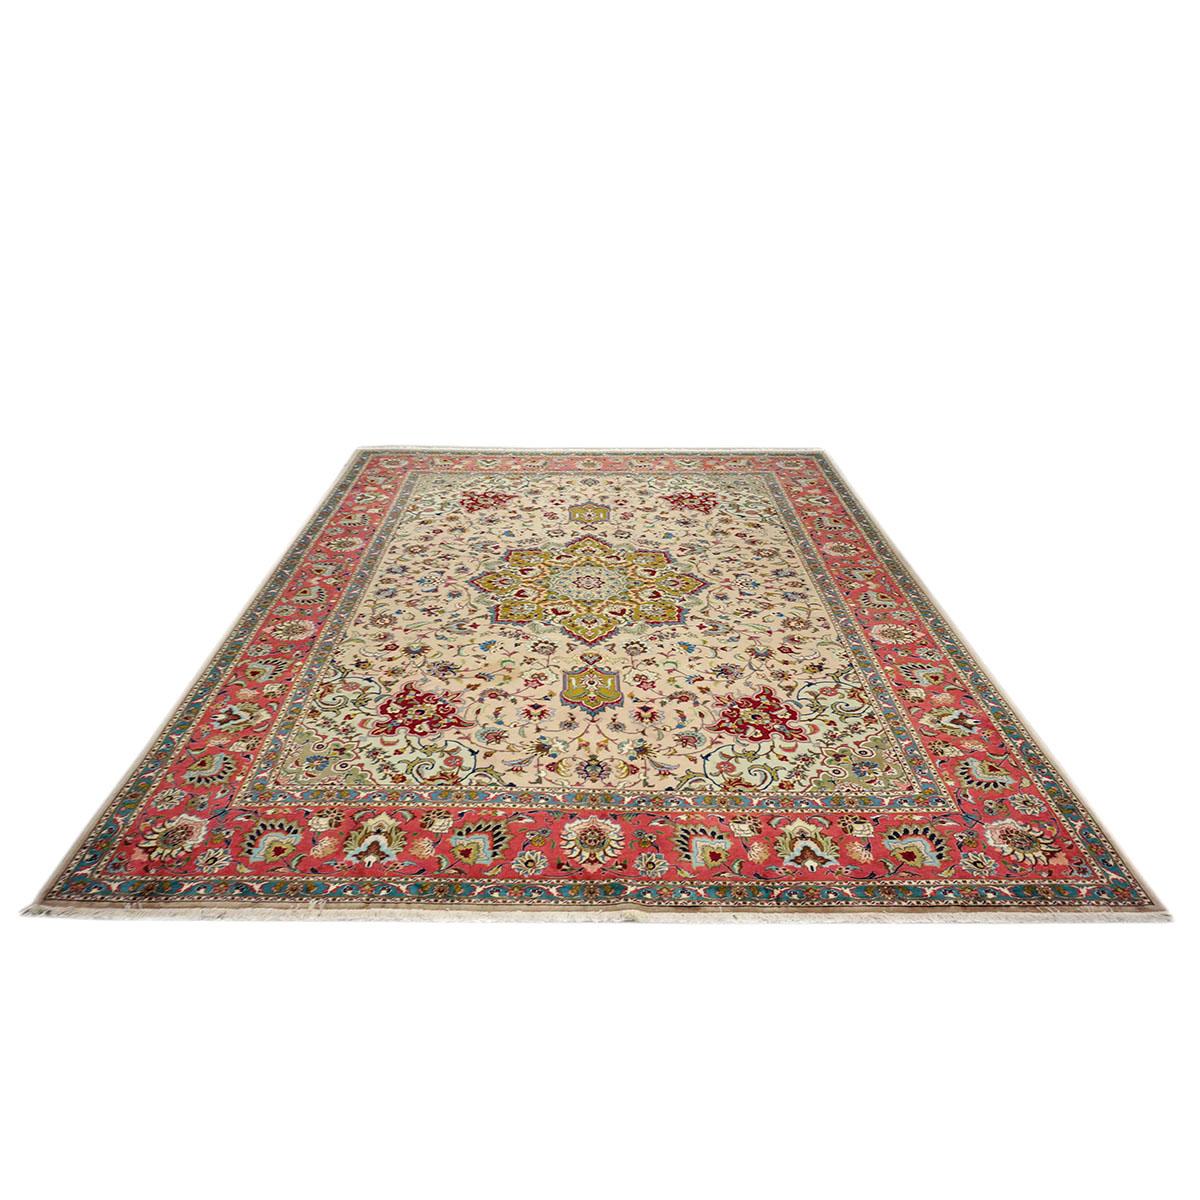 Ashly Fine Rugs presents a 1940s Antique Persian Tabriz. Tabriz is a northern city in modern-day Iran and has forever been famous for the fineness and craftsmanship of its handmade rugs. This piece has a light bone-colored background with design,